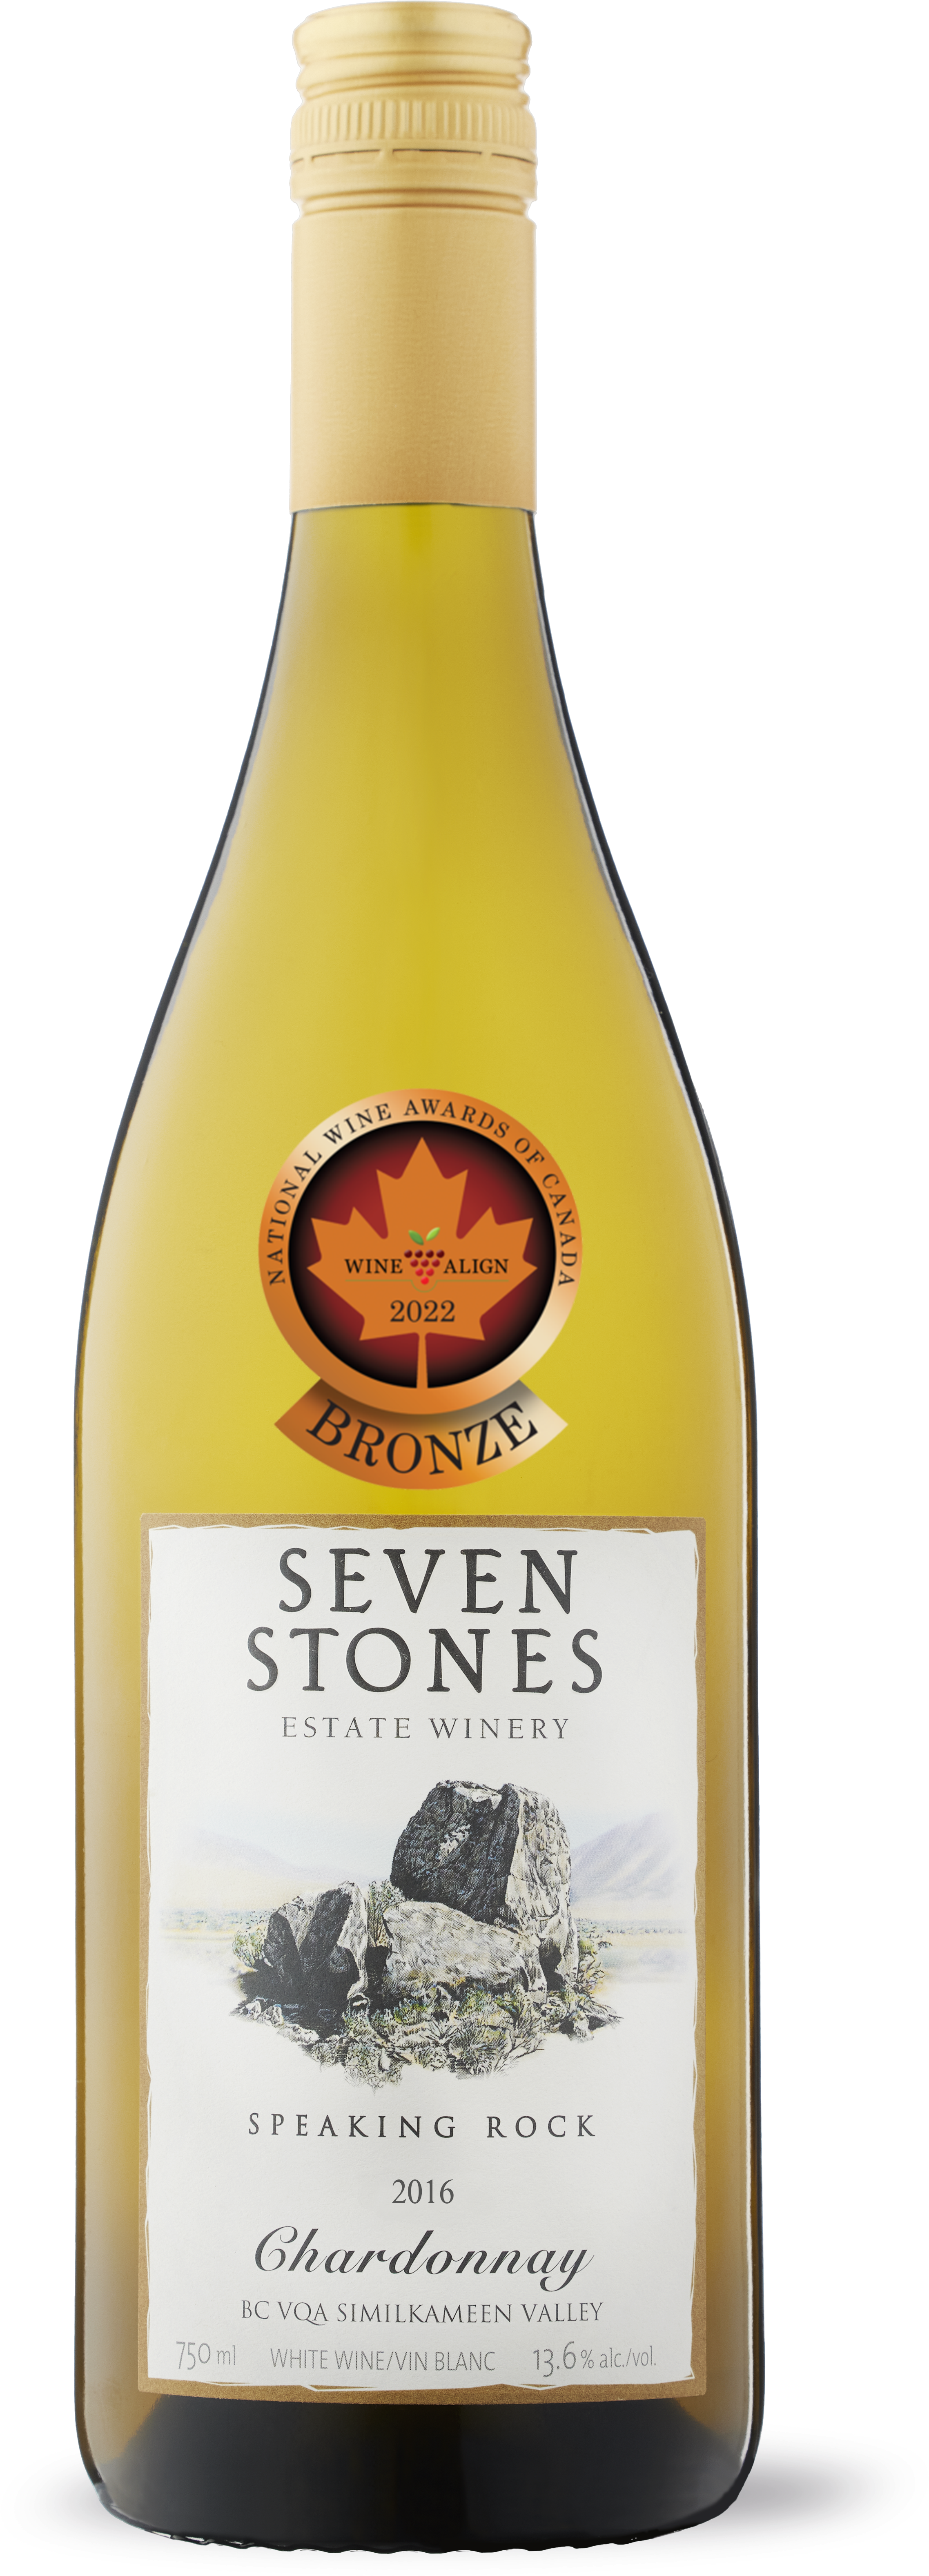 Product Image for 2016 Chardonnay